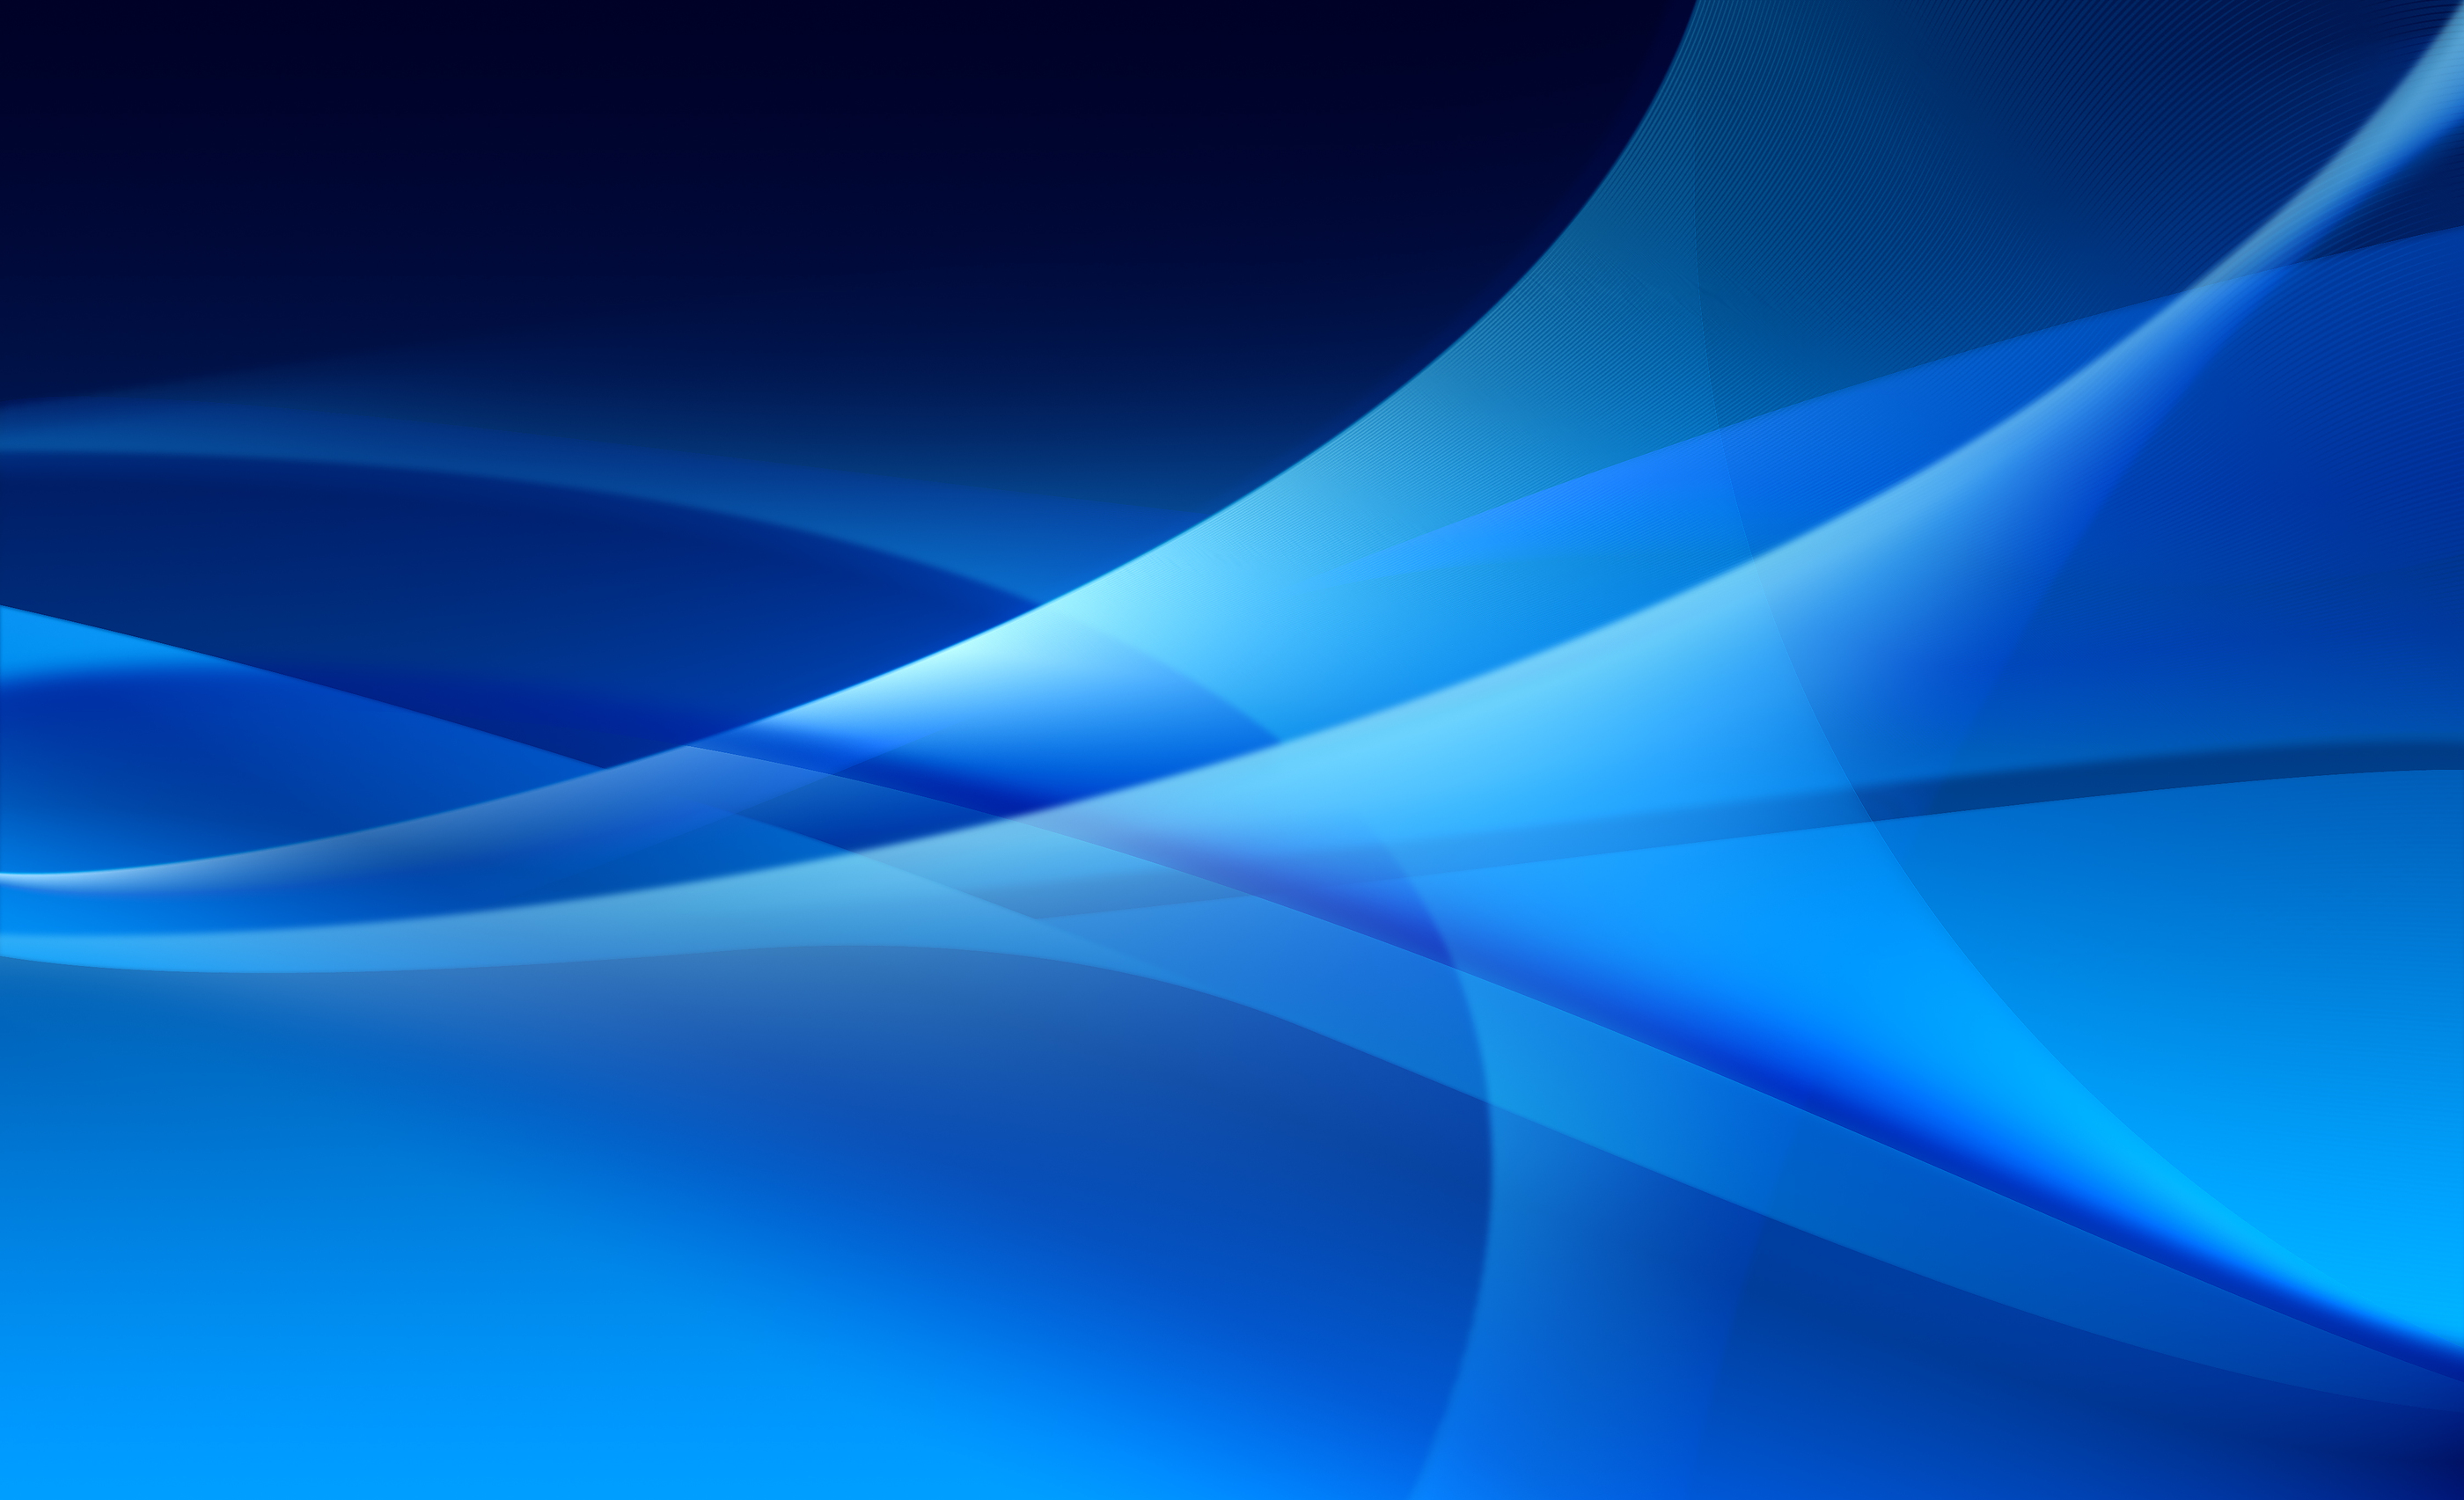 Free Download Blue Background Images Hd Wallpapers Backgrounds Of Your 2800x1705 For Your Desktop Mobile Tablet Explore 75 Pictures Of Blue Backgrounds Pictures Of Blue Backgrounds Pictures Of Blue